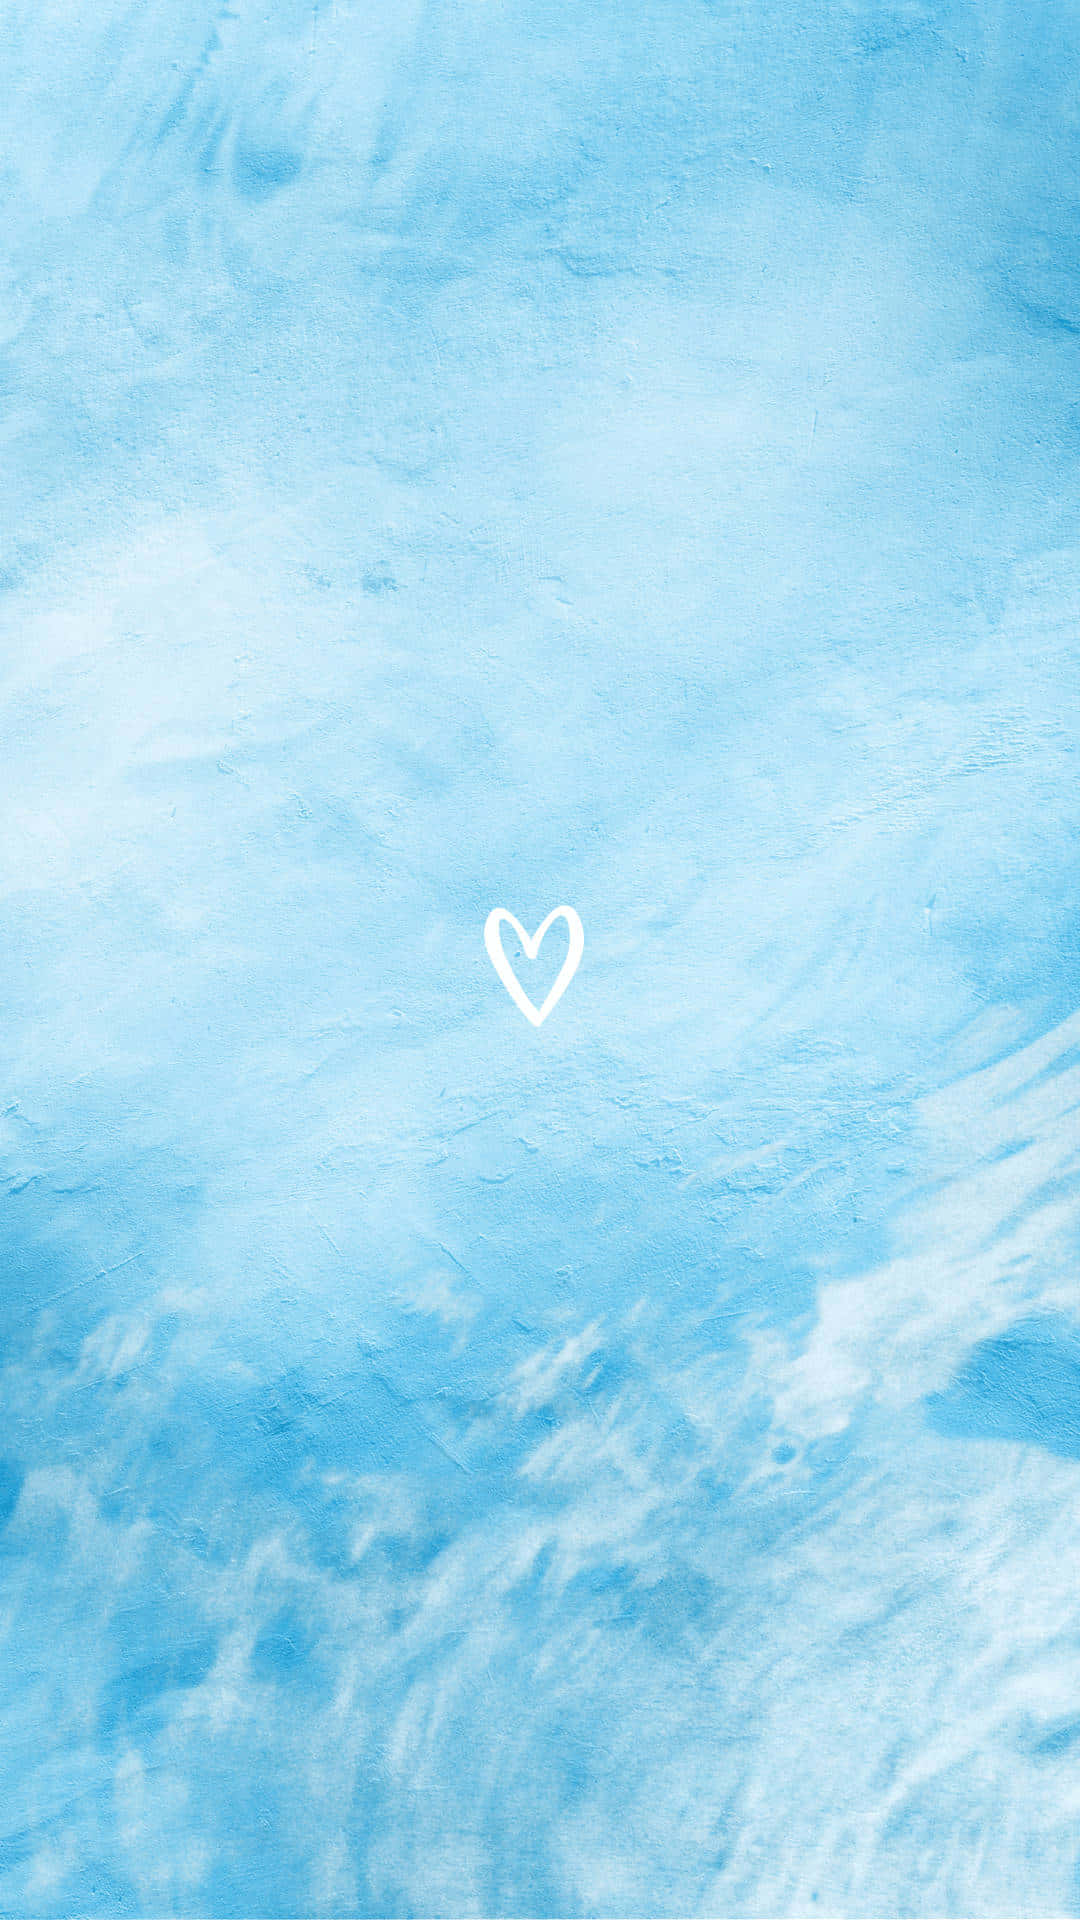 Aesthetic Blue Heart With Clouds pictures